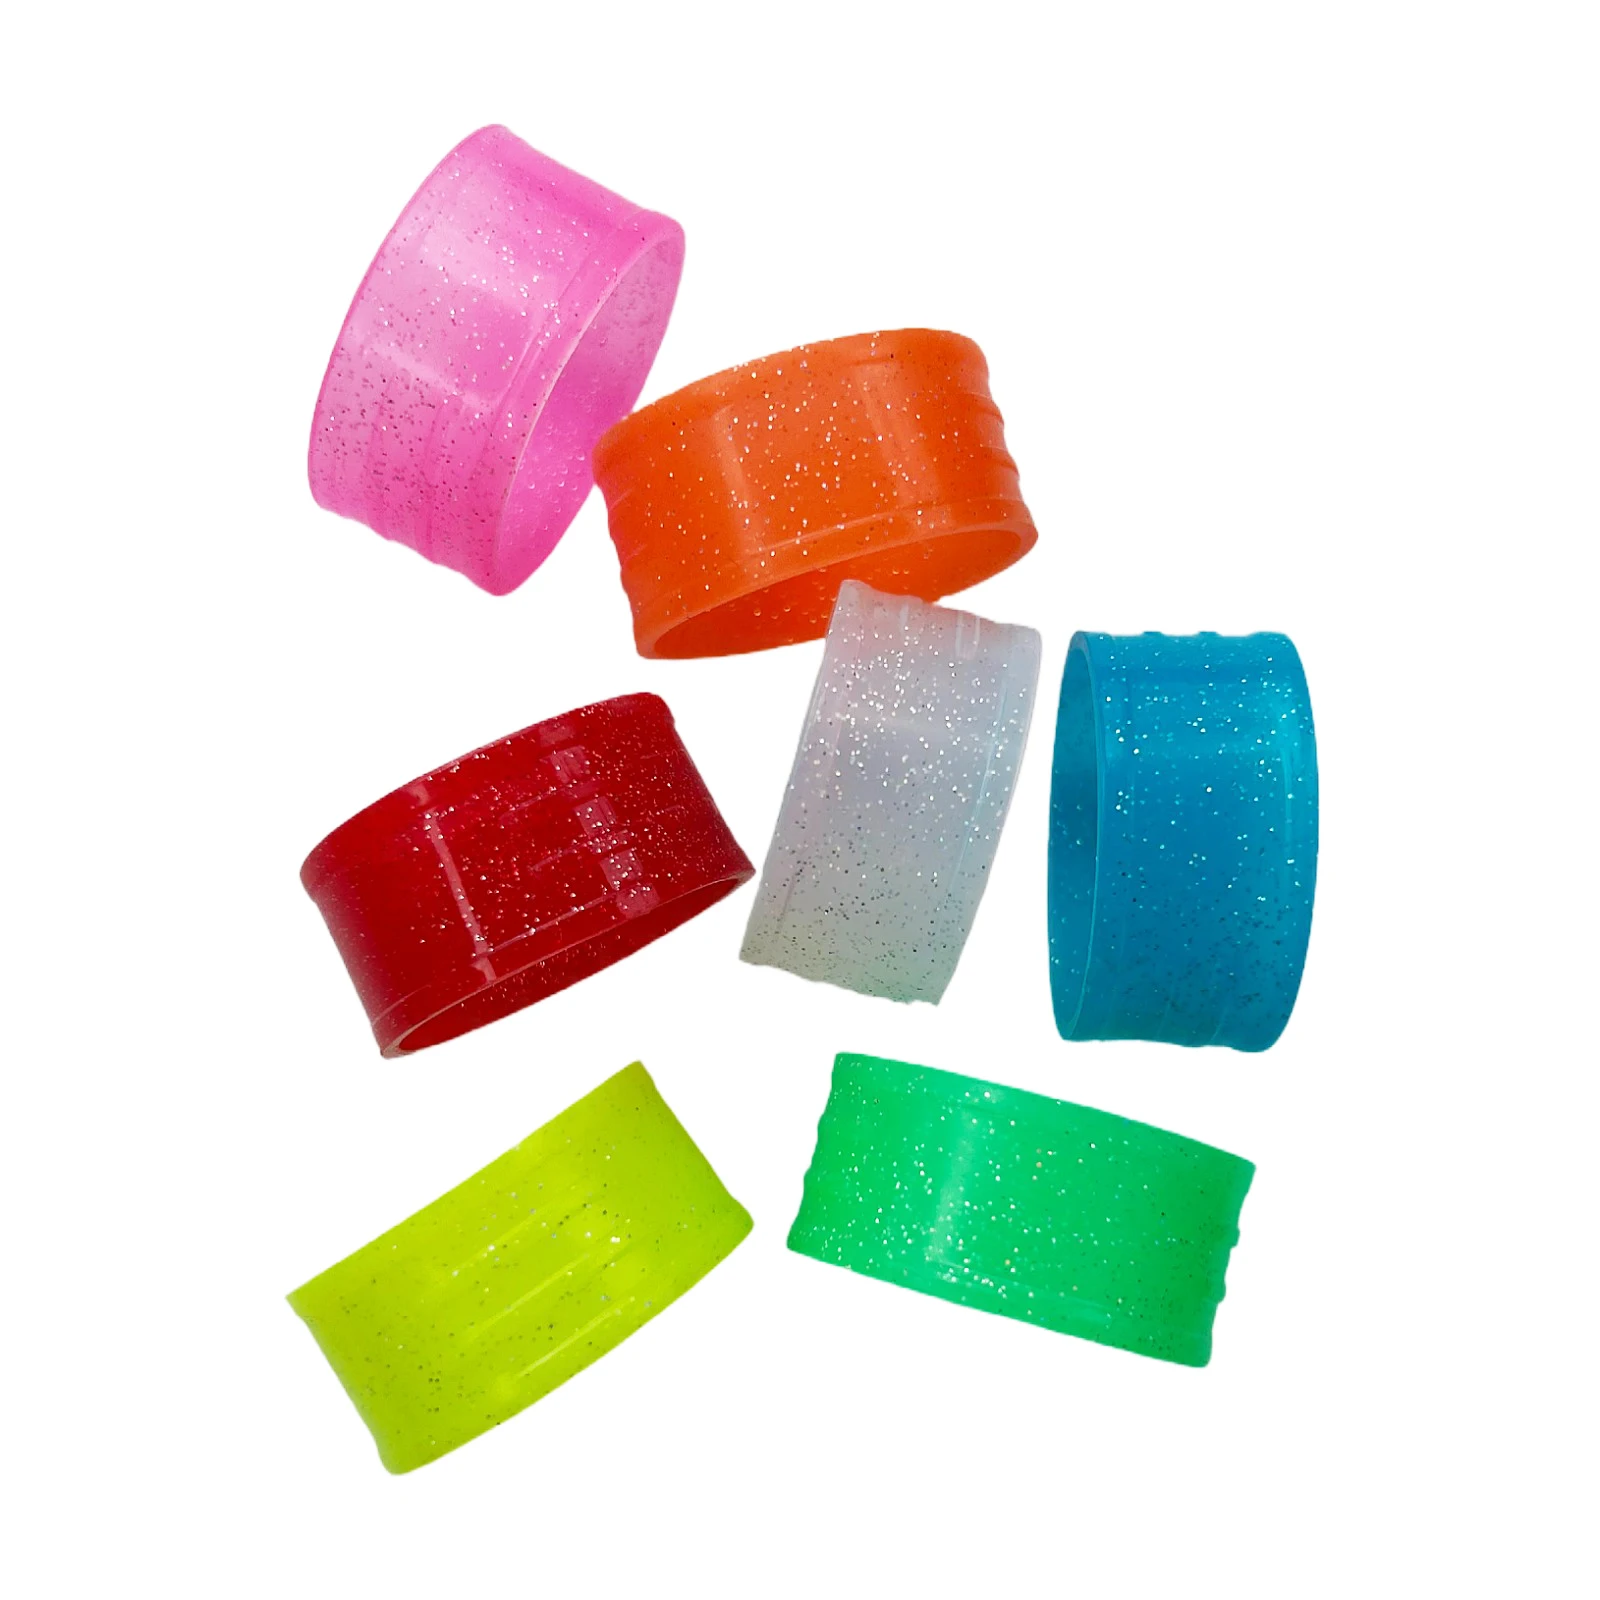 

10 pcs Fluorescence color Tennis racket handle's silicone ring,tennis racket grip,overgrip sealing rings Free shipping